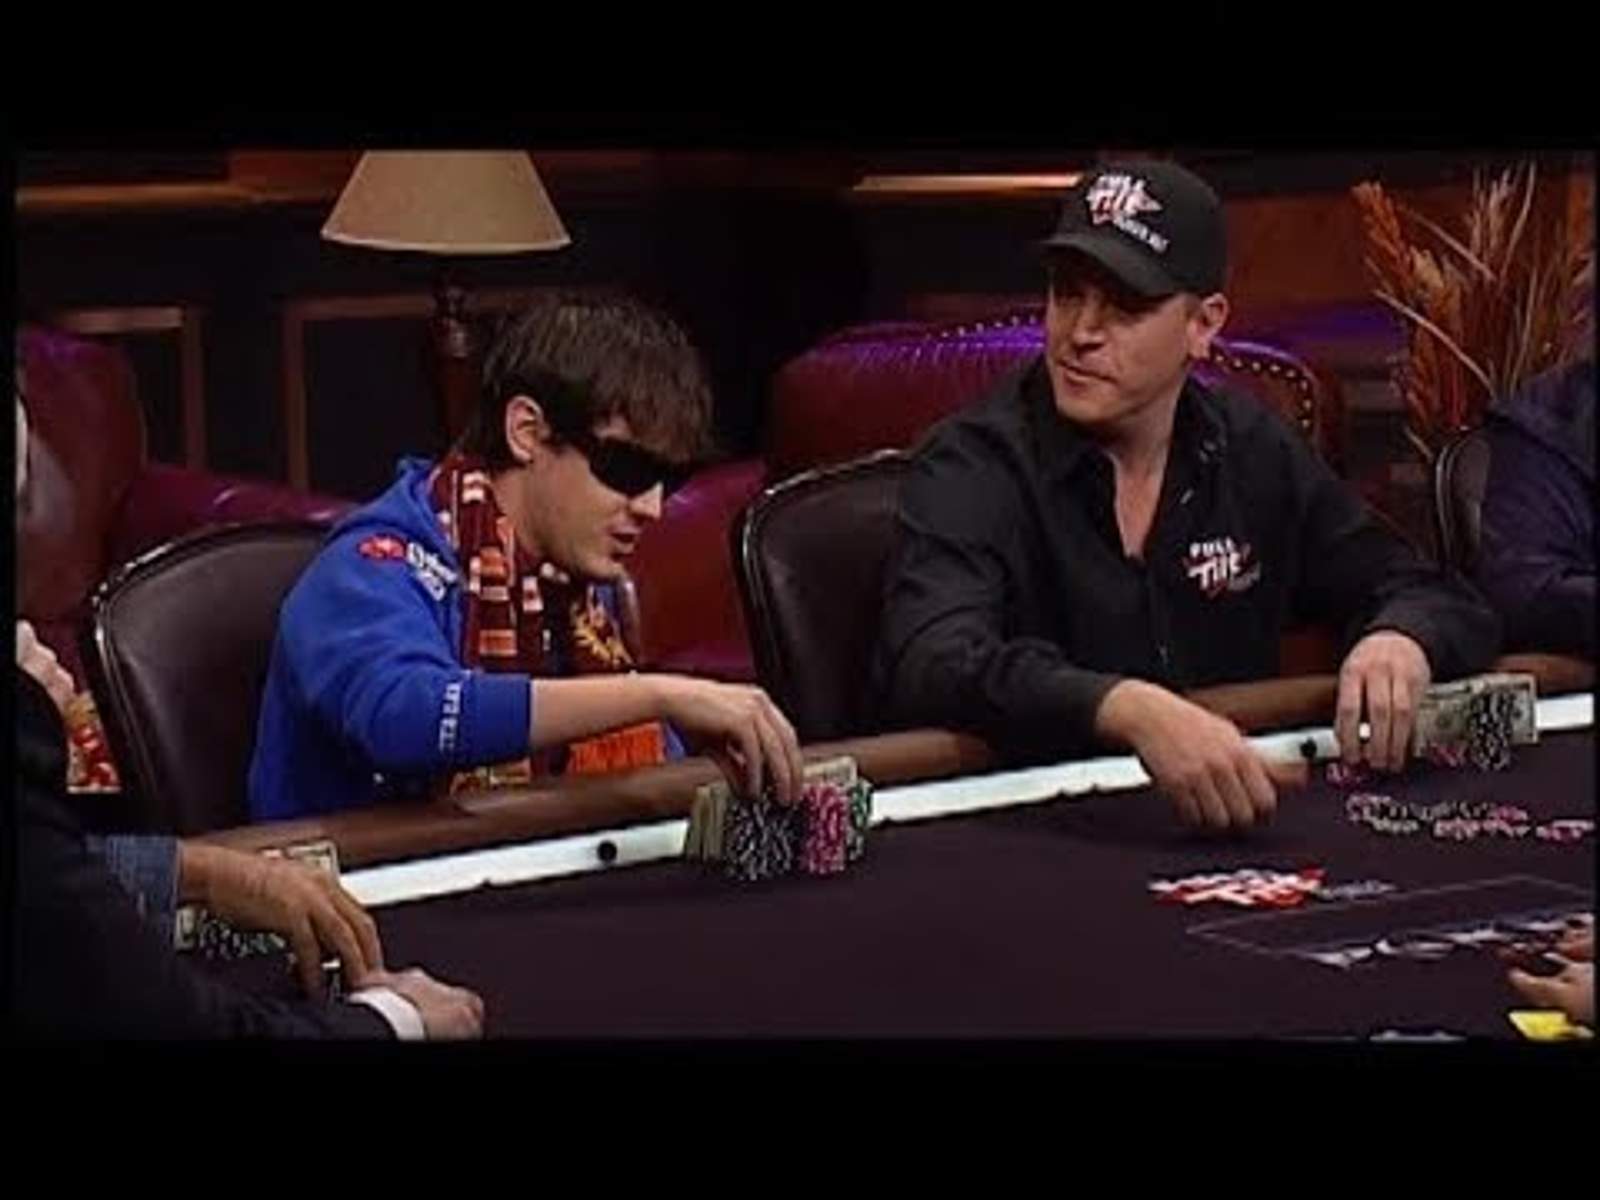 Max Pescatori Leads The Italians Against the Americans on PokerGO